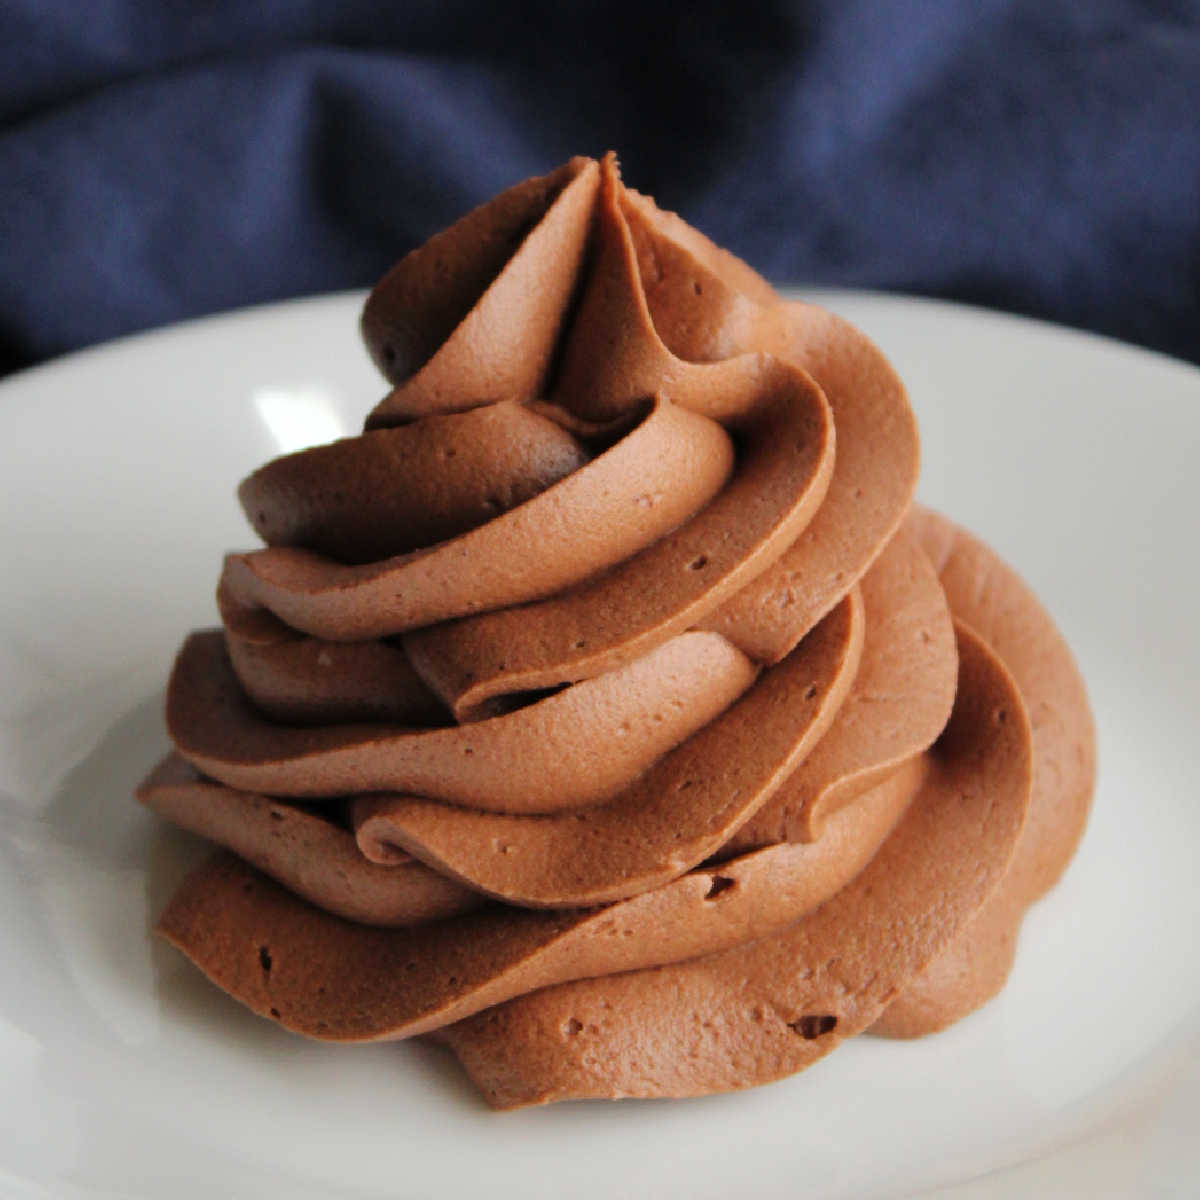 Swirl of piped chocolate fudge frosting with ruffled edges showing texture of icing.